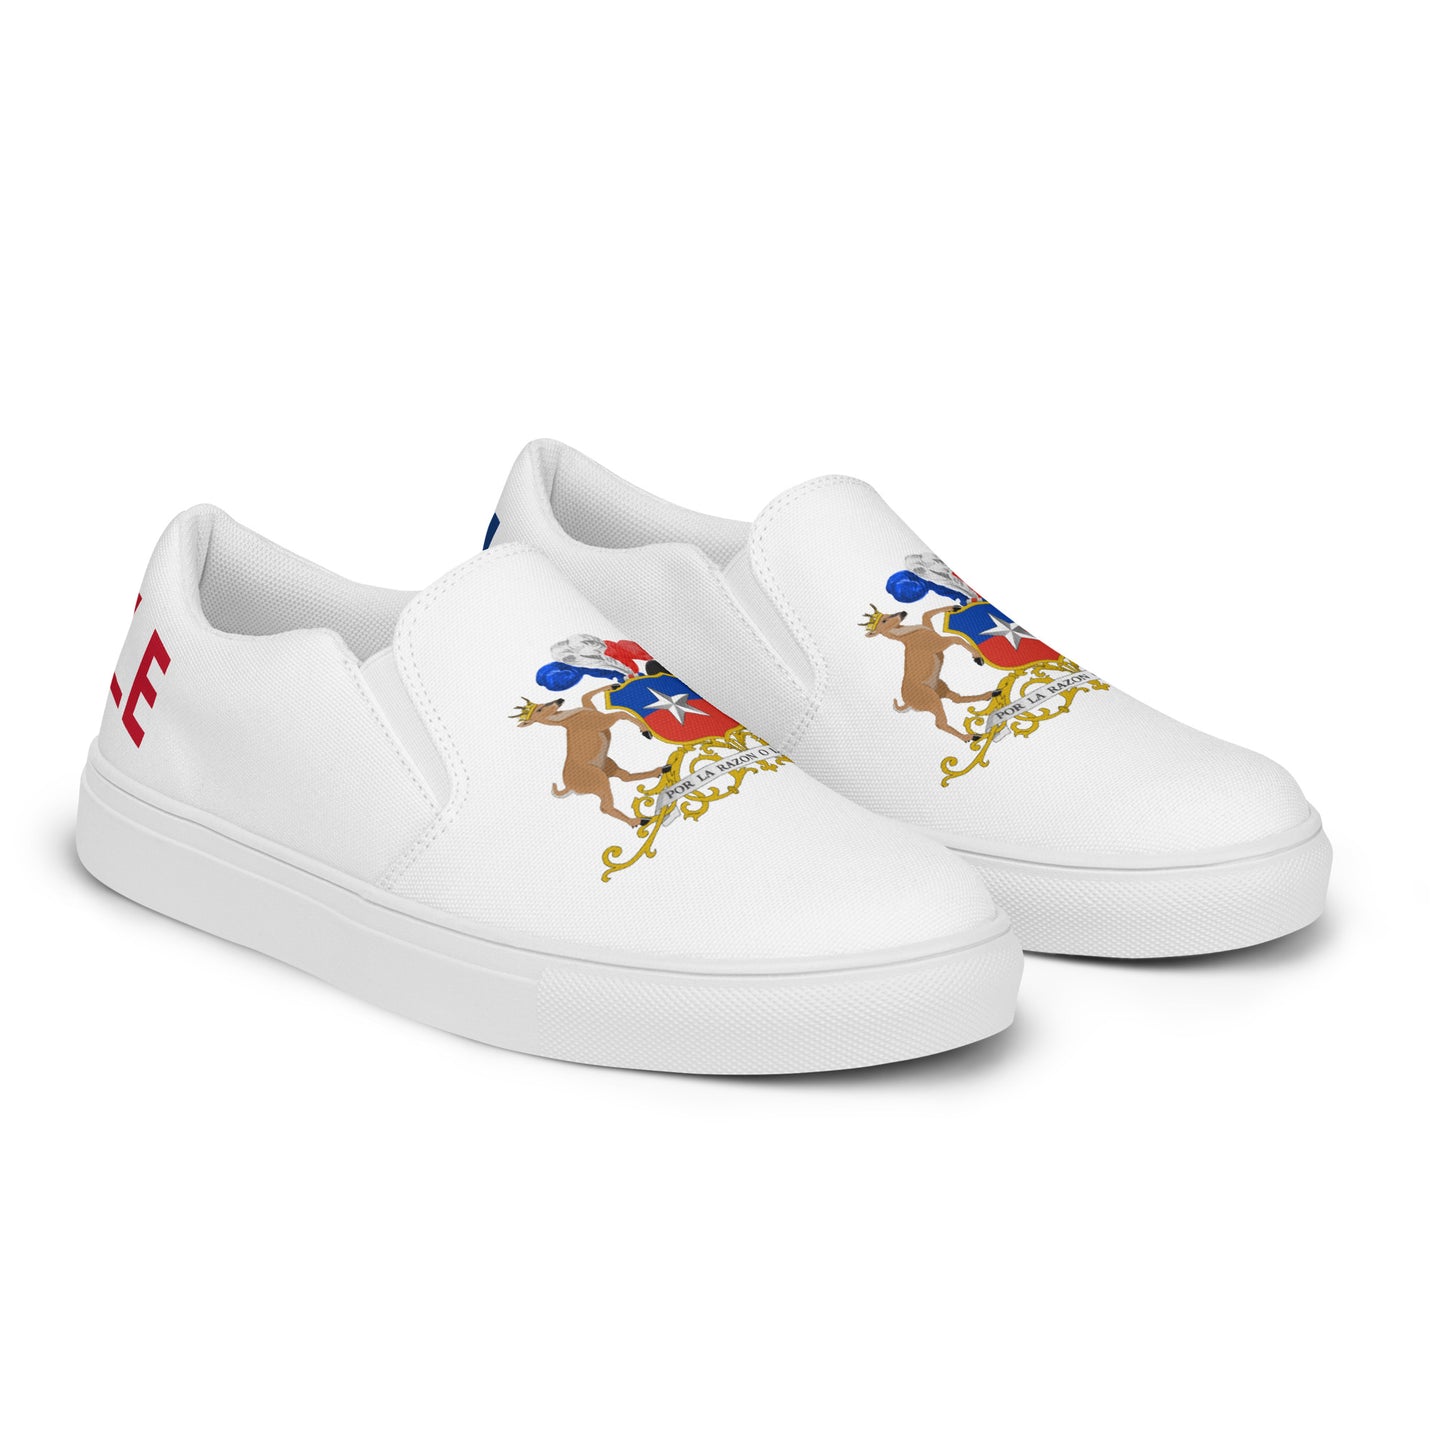 Chile - Women - White - Slip-on shoes